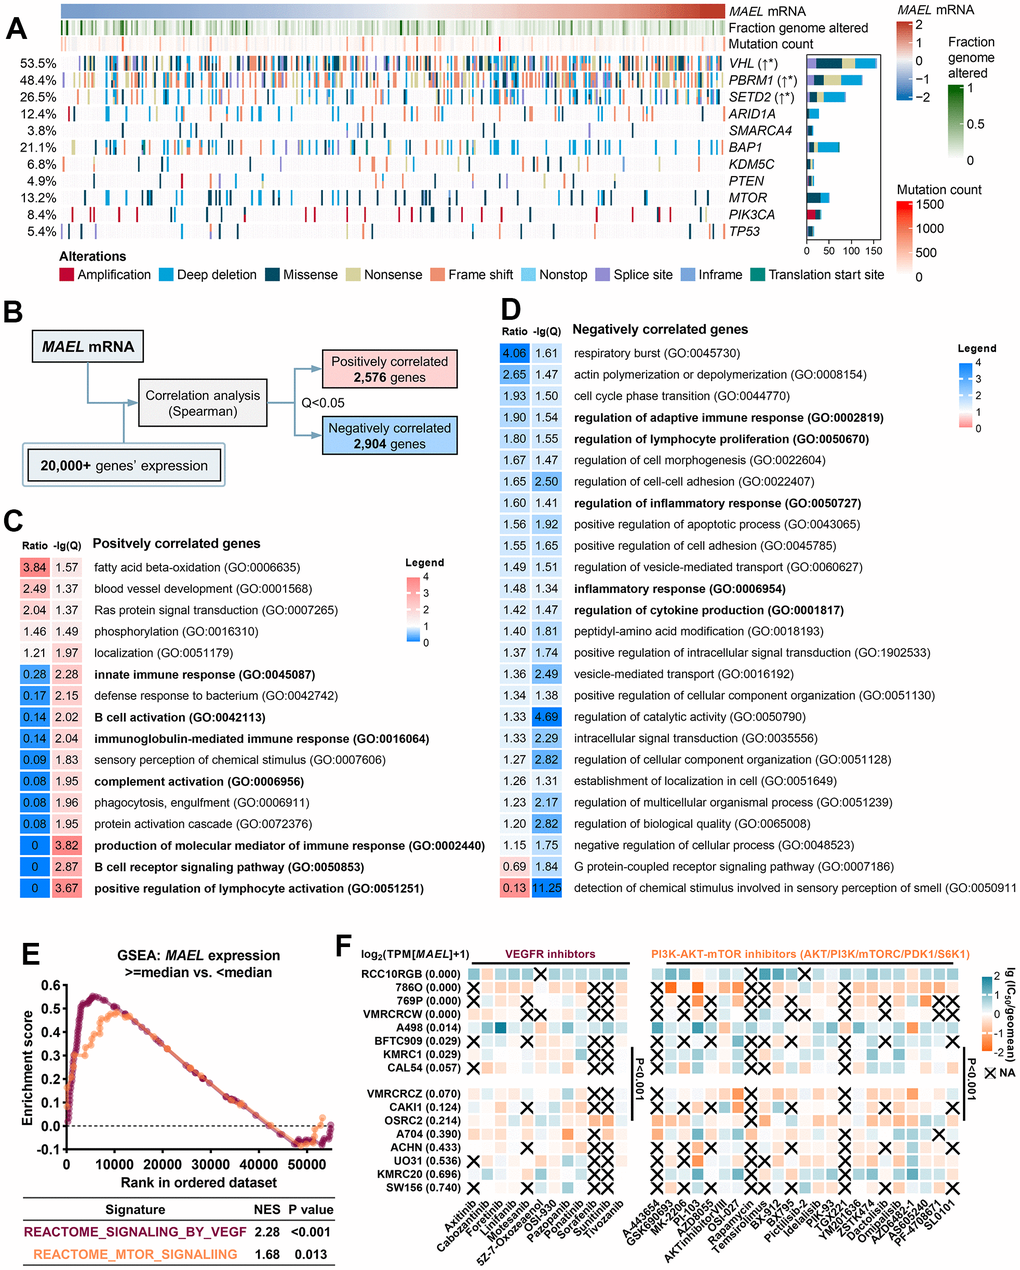 Associations of the MAEL expression with genomic alterations, gene expression, and sensitivities to VEGFR and PI3K-AKT-mTOR inhibitors. (A) Oncoprint illustrating the association between MAEL expression and genomic indices and alterations in the TCGA-KIRC cohort. (B) Diagram of identifying the genes with expression correlated with MAEL expression in the TCGA-KIRC cohort. (C, D) Gene Ontology results of the positively correlated genes (C) and negatively correlated genes (D). (E) Gene Set Enrichment Analysis results revealing the associations between MAEL expression (high vs. low, cut-off: median) and the enrichments of VEGF- and mTOR-related genes in the TCGA-KIRC cohort. (F) MAEL expression and its associations with the half-maximal inhibitory concentration levels in the 16 ccRCC cell lines. Abbreviations: IC50=half-maximal inhibitory concentration levels, TCGA-KIRC=The Cancer Genome Atlas-Kidney Renal Clear Cell Carcinoma.